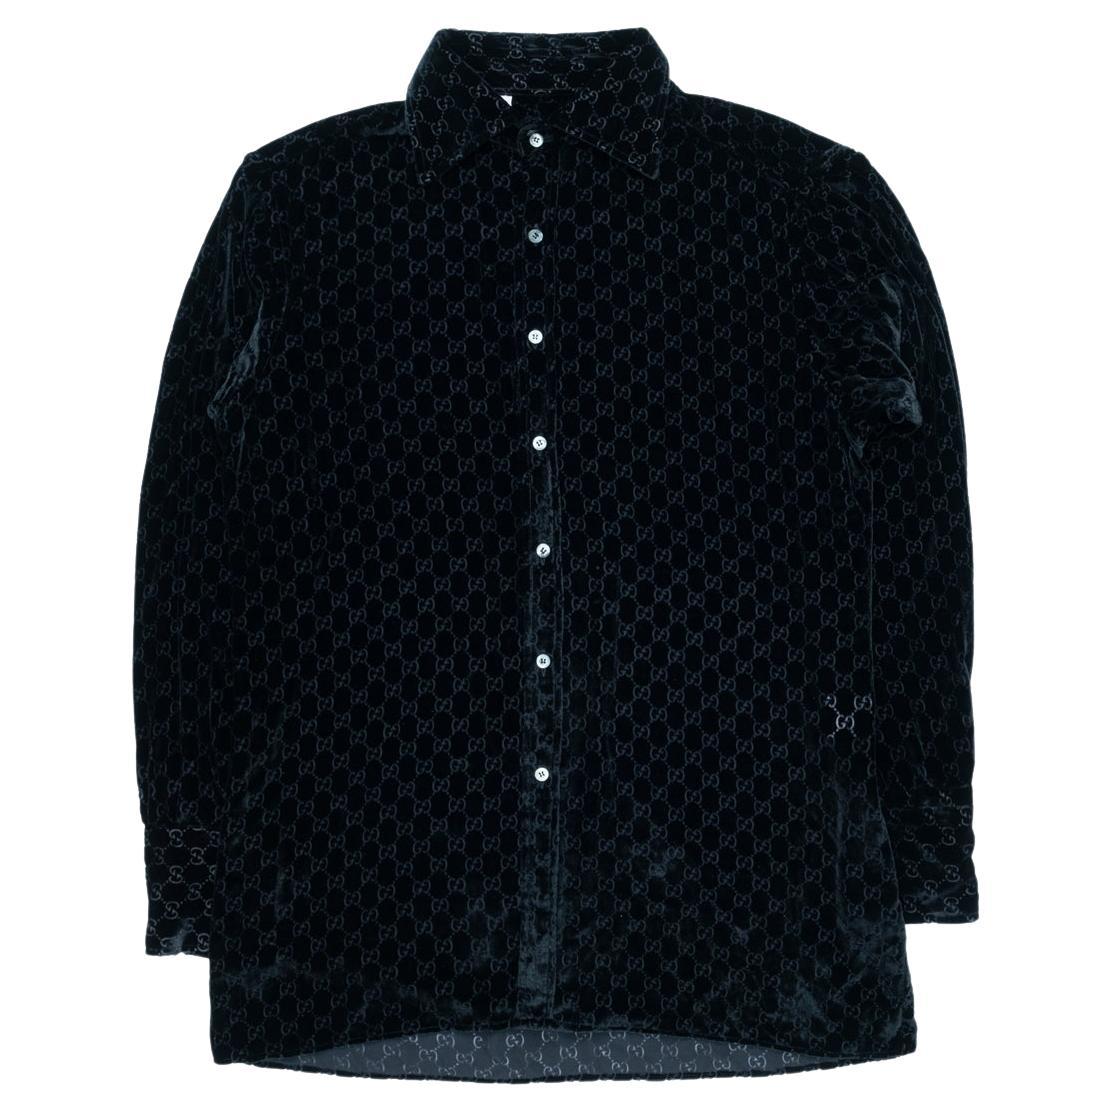 Gucci by Tom Ford AW1997 Oversized Velvet Monogrammed Button-Up